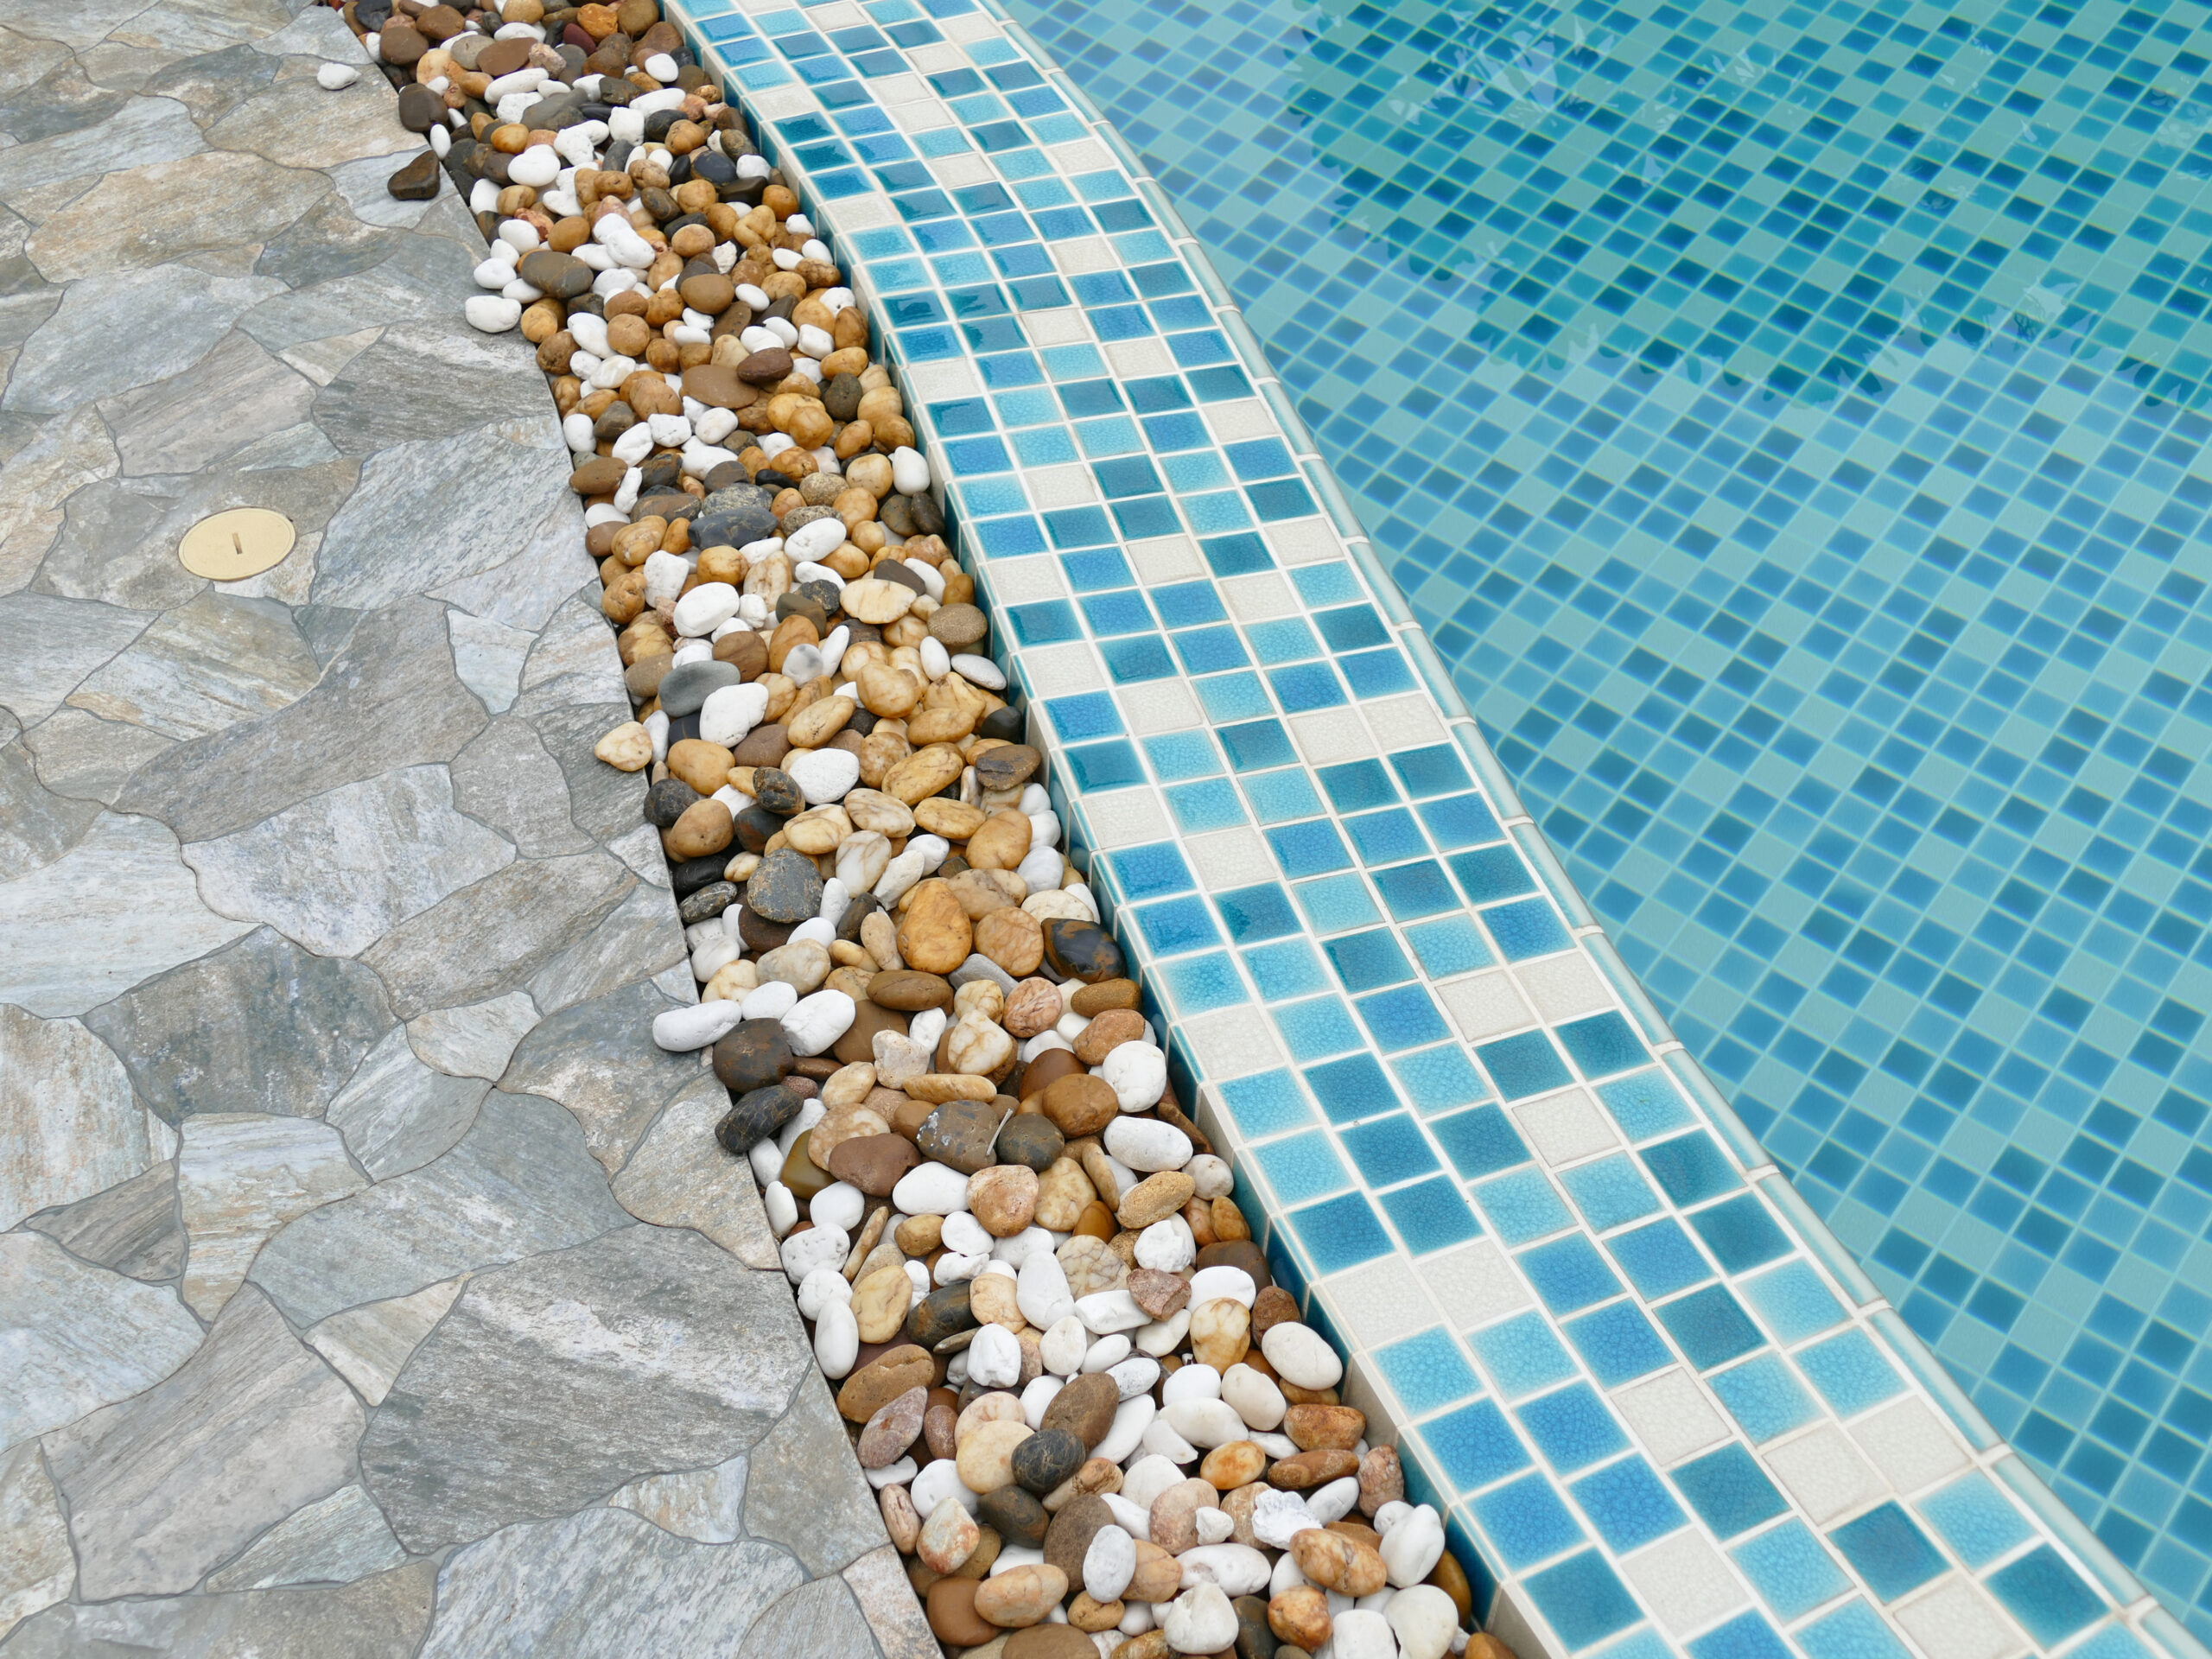 Natural elements incorporated into pool design, such as rocks and stones at the poolside, creating an organic and harmonious blend of water and earth aesthetics.